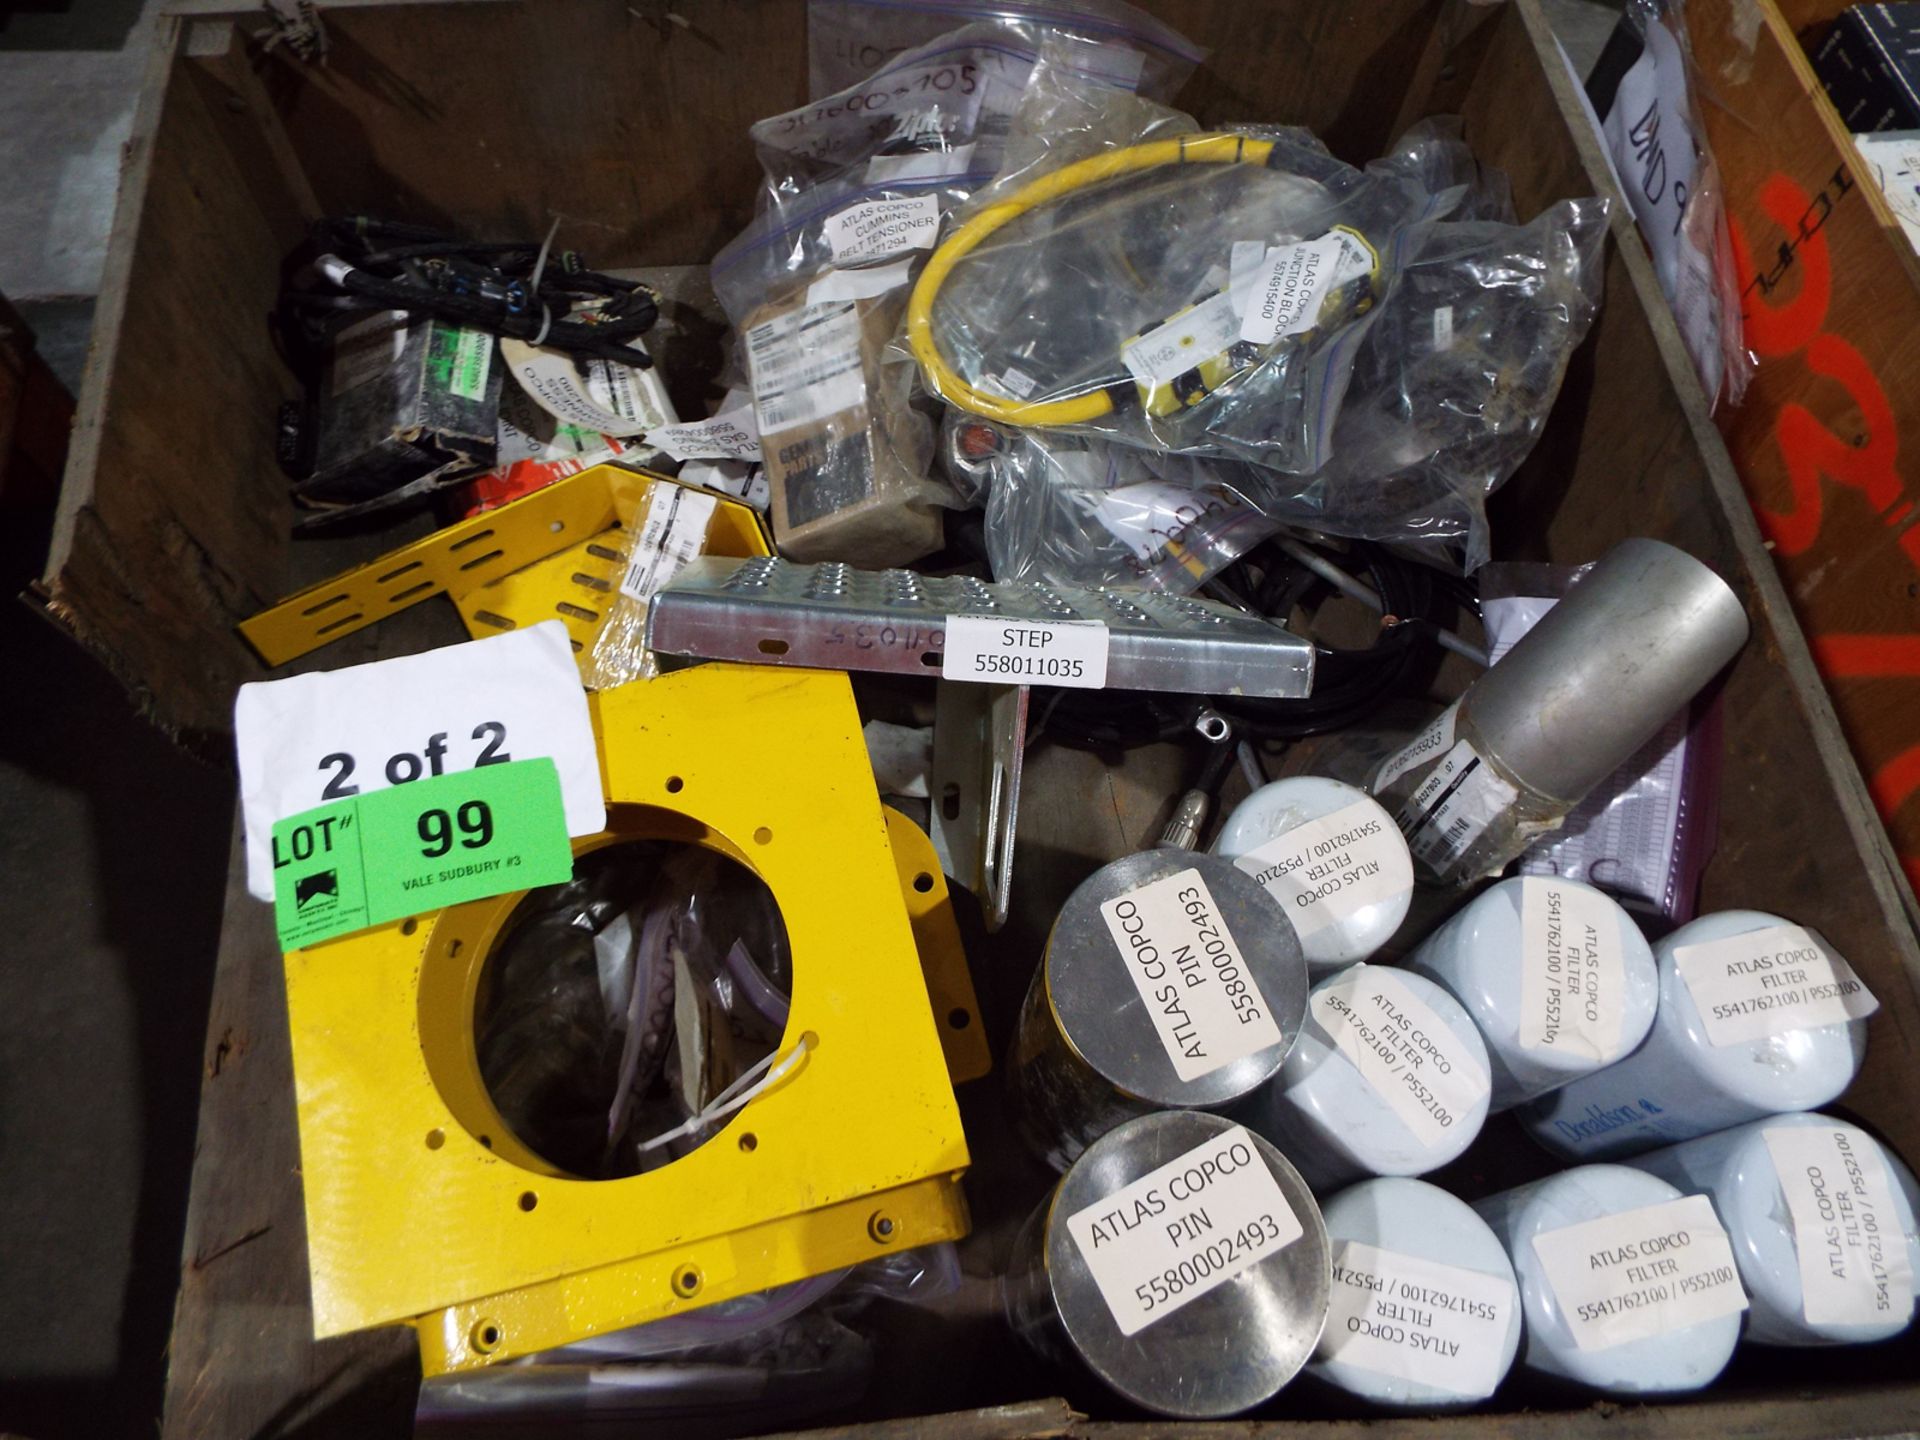 LOT/ ATLAS COPCO PARTS INCLUDING PINS, STEP, AND FILTERS